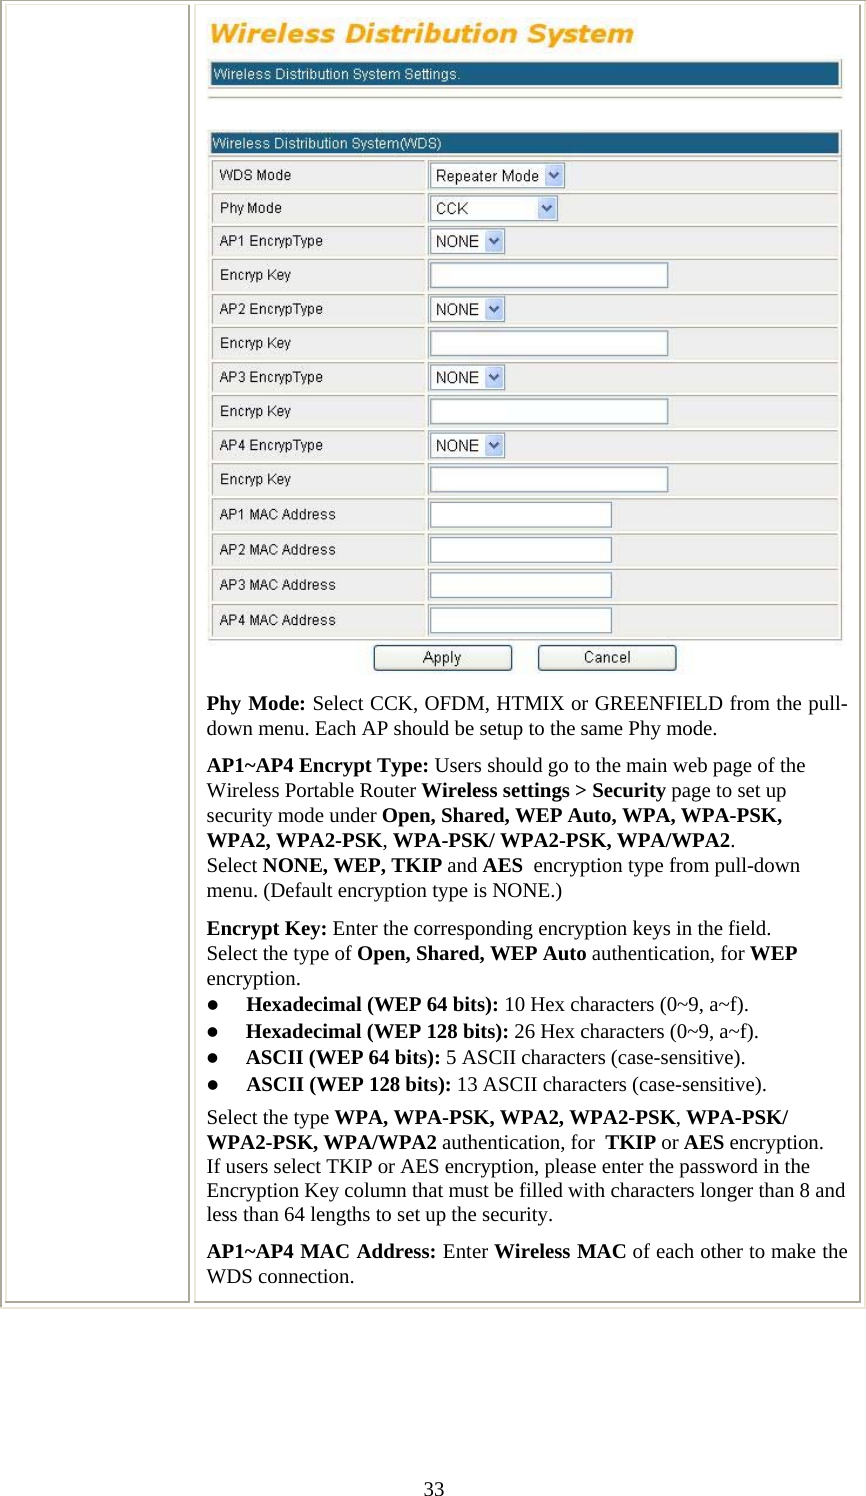   33Phy Mode: Select CCK, OFDM, HTMIX or GREENFIELD from the pull-down menu. Each AP should be setup to the same Phy mode. AP1~AP4 Encrypt Type: Users should go to the main web page of the Wireless Portable Router Wireless settings &gt; Security page to set up security mode under Open, Shared, WEP Auto, WPA, WPA-PSK, WPA2, WPA2-PSK, WPA-PSK/ WPA2-PSK, WPA/WPA2. Select NONE, WEP, TKIP and AES  encryption type from pull-down menu. (Default encryption type is NONE.)  Encrypt Key: Enter the corresponding encryption keys in the field.  Select the type of Open, Shared, WEP Auto authentication, for WEP encryption.  z Hexadecimal (WEP 64 bits): 10 Hex characters (0~9, a~f).  z Hexadecimal (WEP 128 bits): 26 Hex characters (0~9, a~f). z ASCII (WEP 64 bits): 5 ASCII characters (case-sensitive). z ASCII (WEP 128 bits): 13 ASCII characters (case-sensitive). Select the type WPA, WPA-PSK, WPA2, WPA2-PSK, WPA-PSK/ WPA2-PSK, WPA/WPA2 authentication, for  TKIP or AES encryption. If users select TKIP or AES encryption, please enter the password in the Encryption Key column that must be filled with characters longer than 8 and less than 64 lengths to set up the security.   AP1~AP4 MAC Address: Enter Wireless MAC of each other to make the WDS connection.  